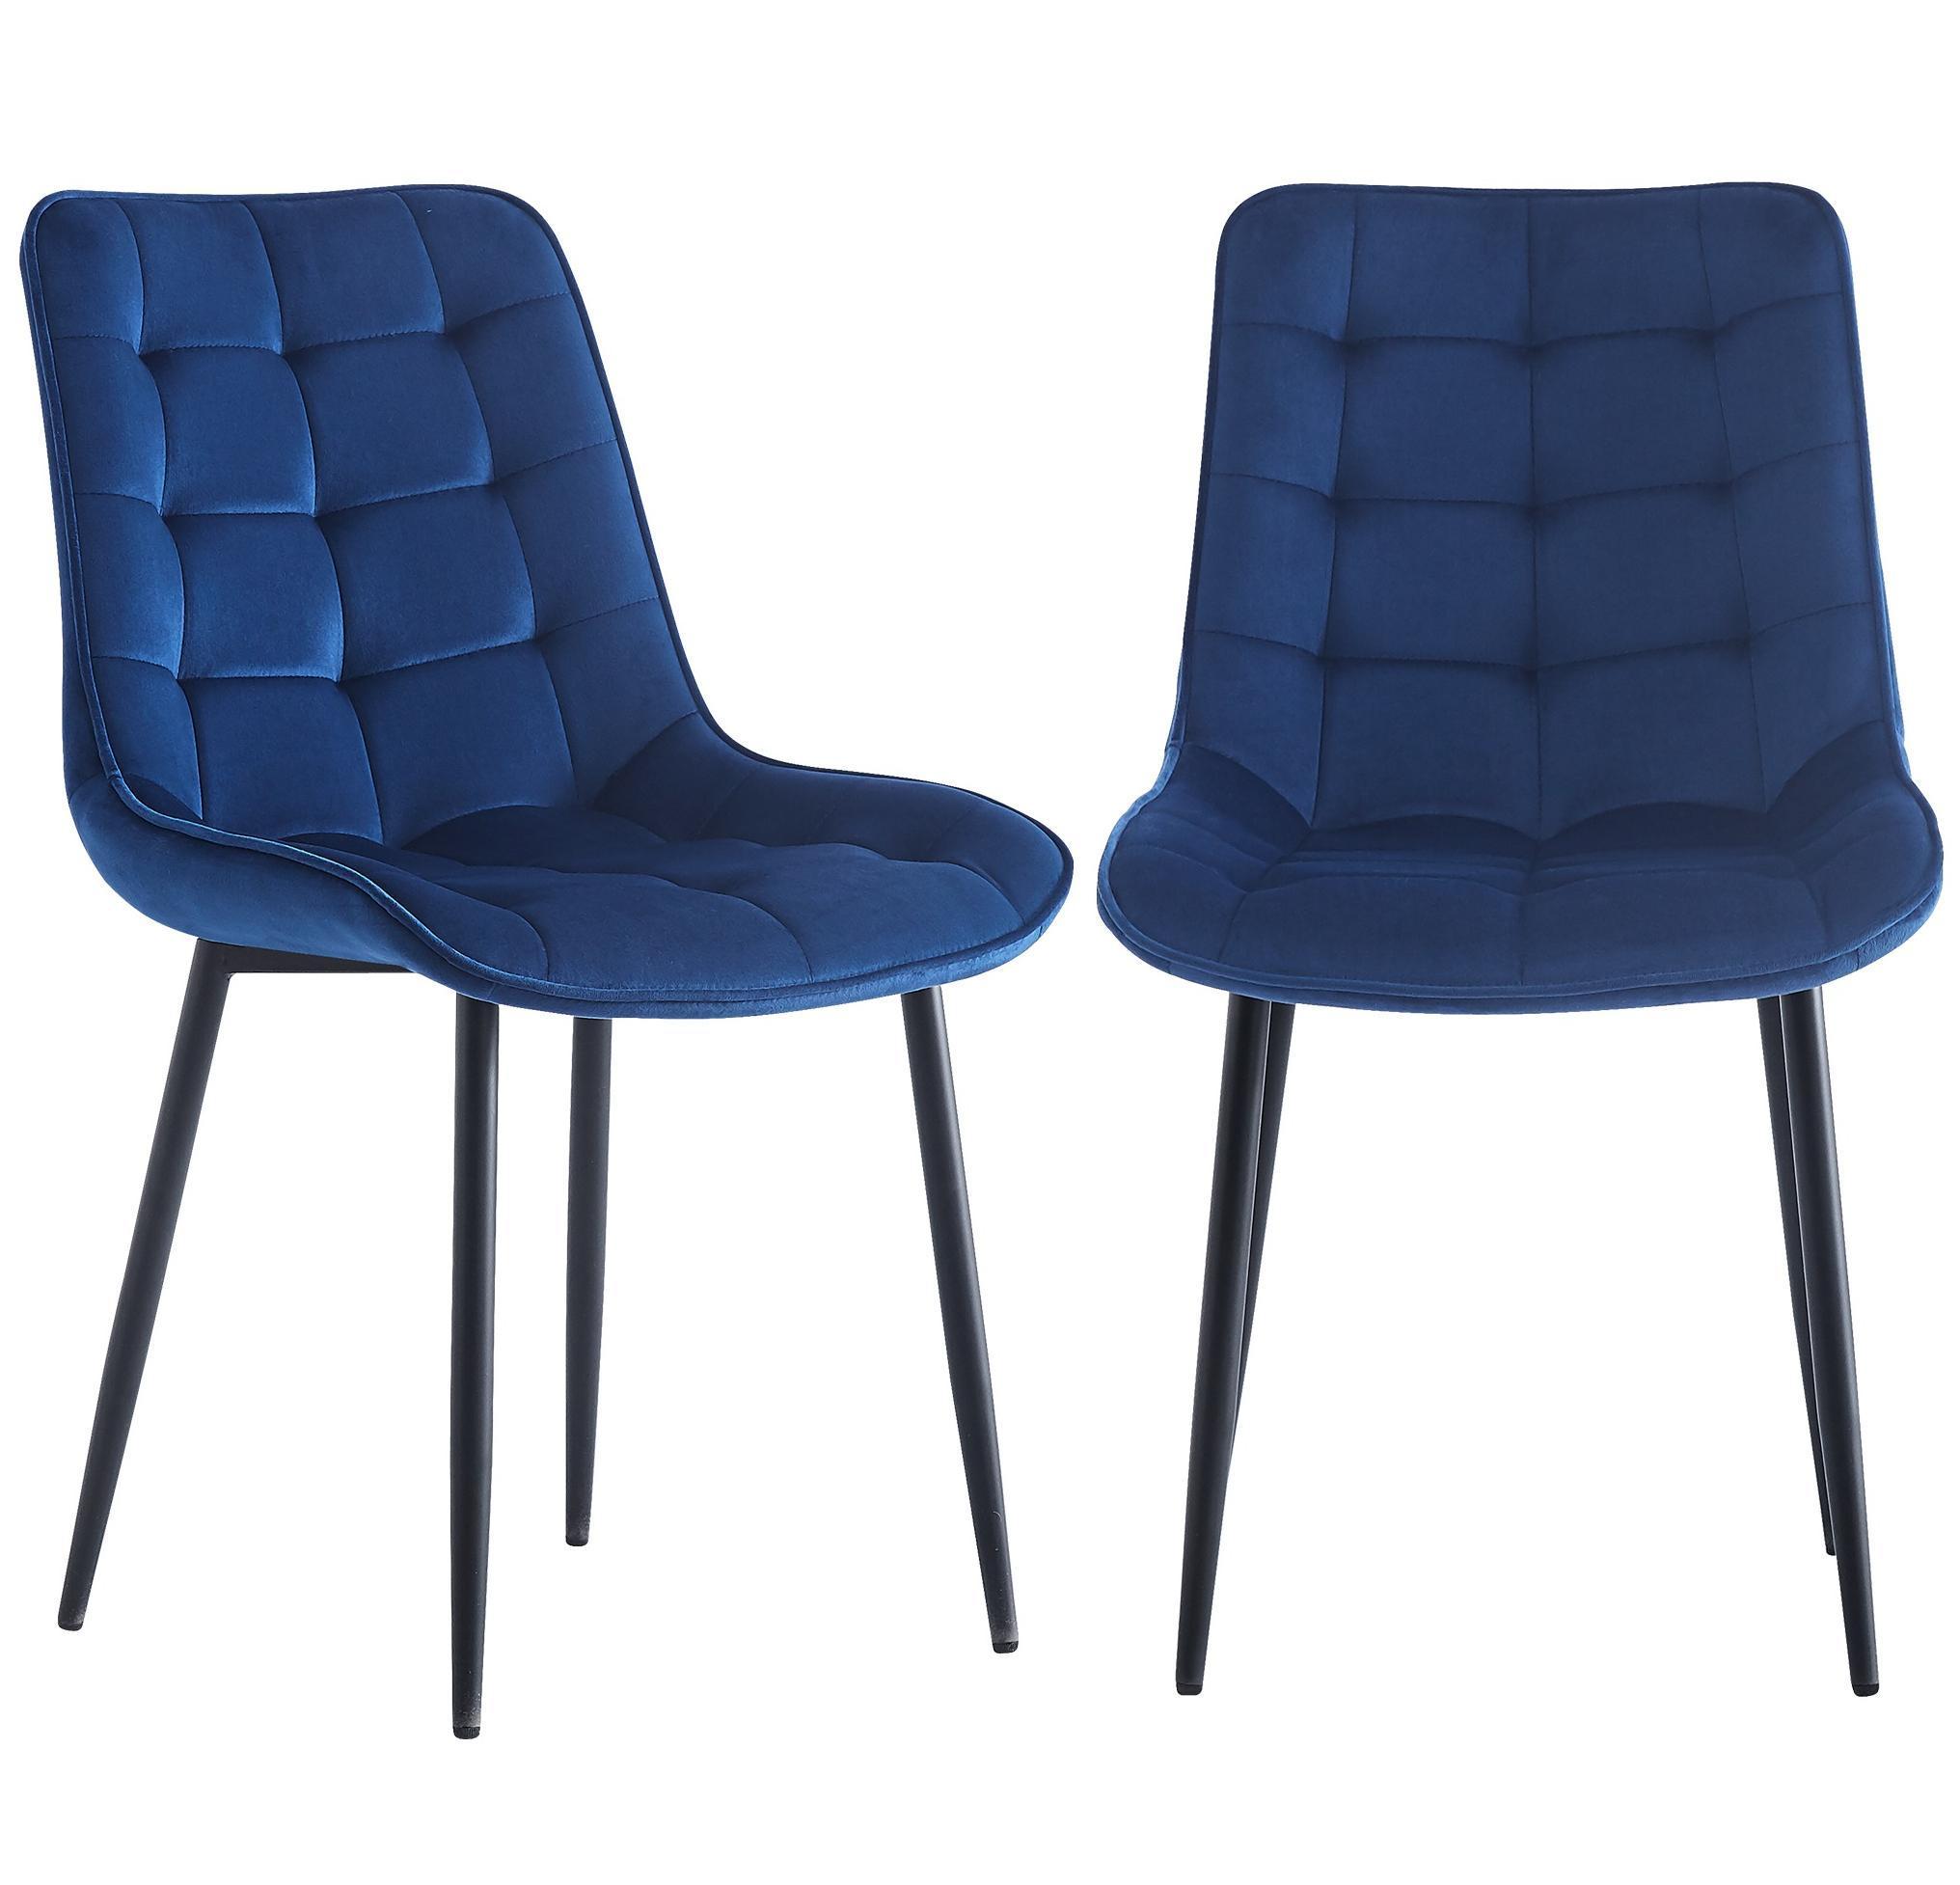 Modern Style Dining Chairs, 2 pieces (Blue)